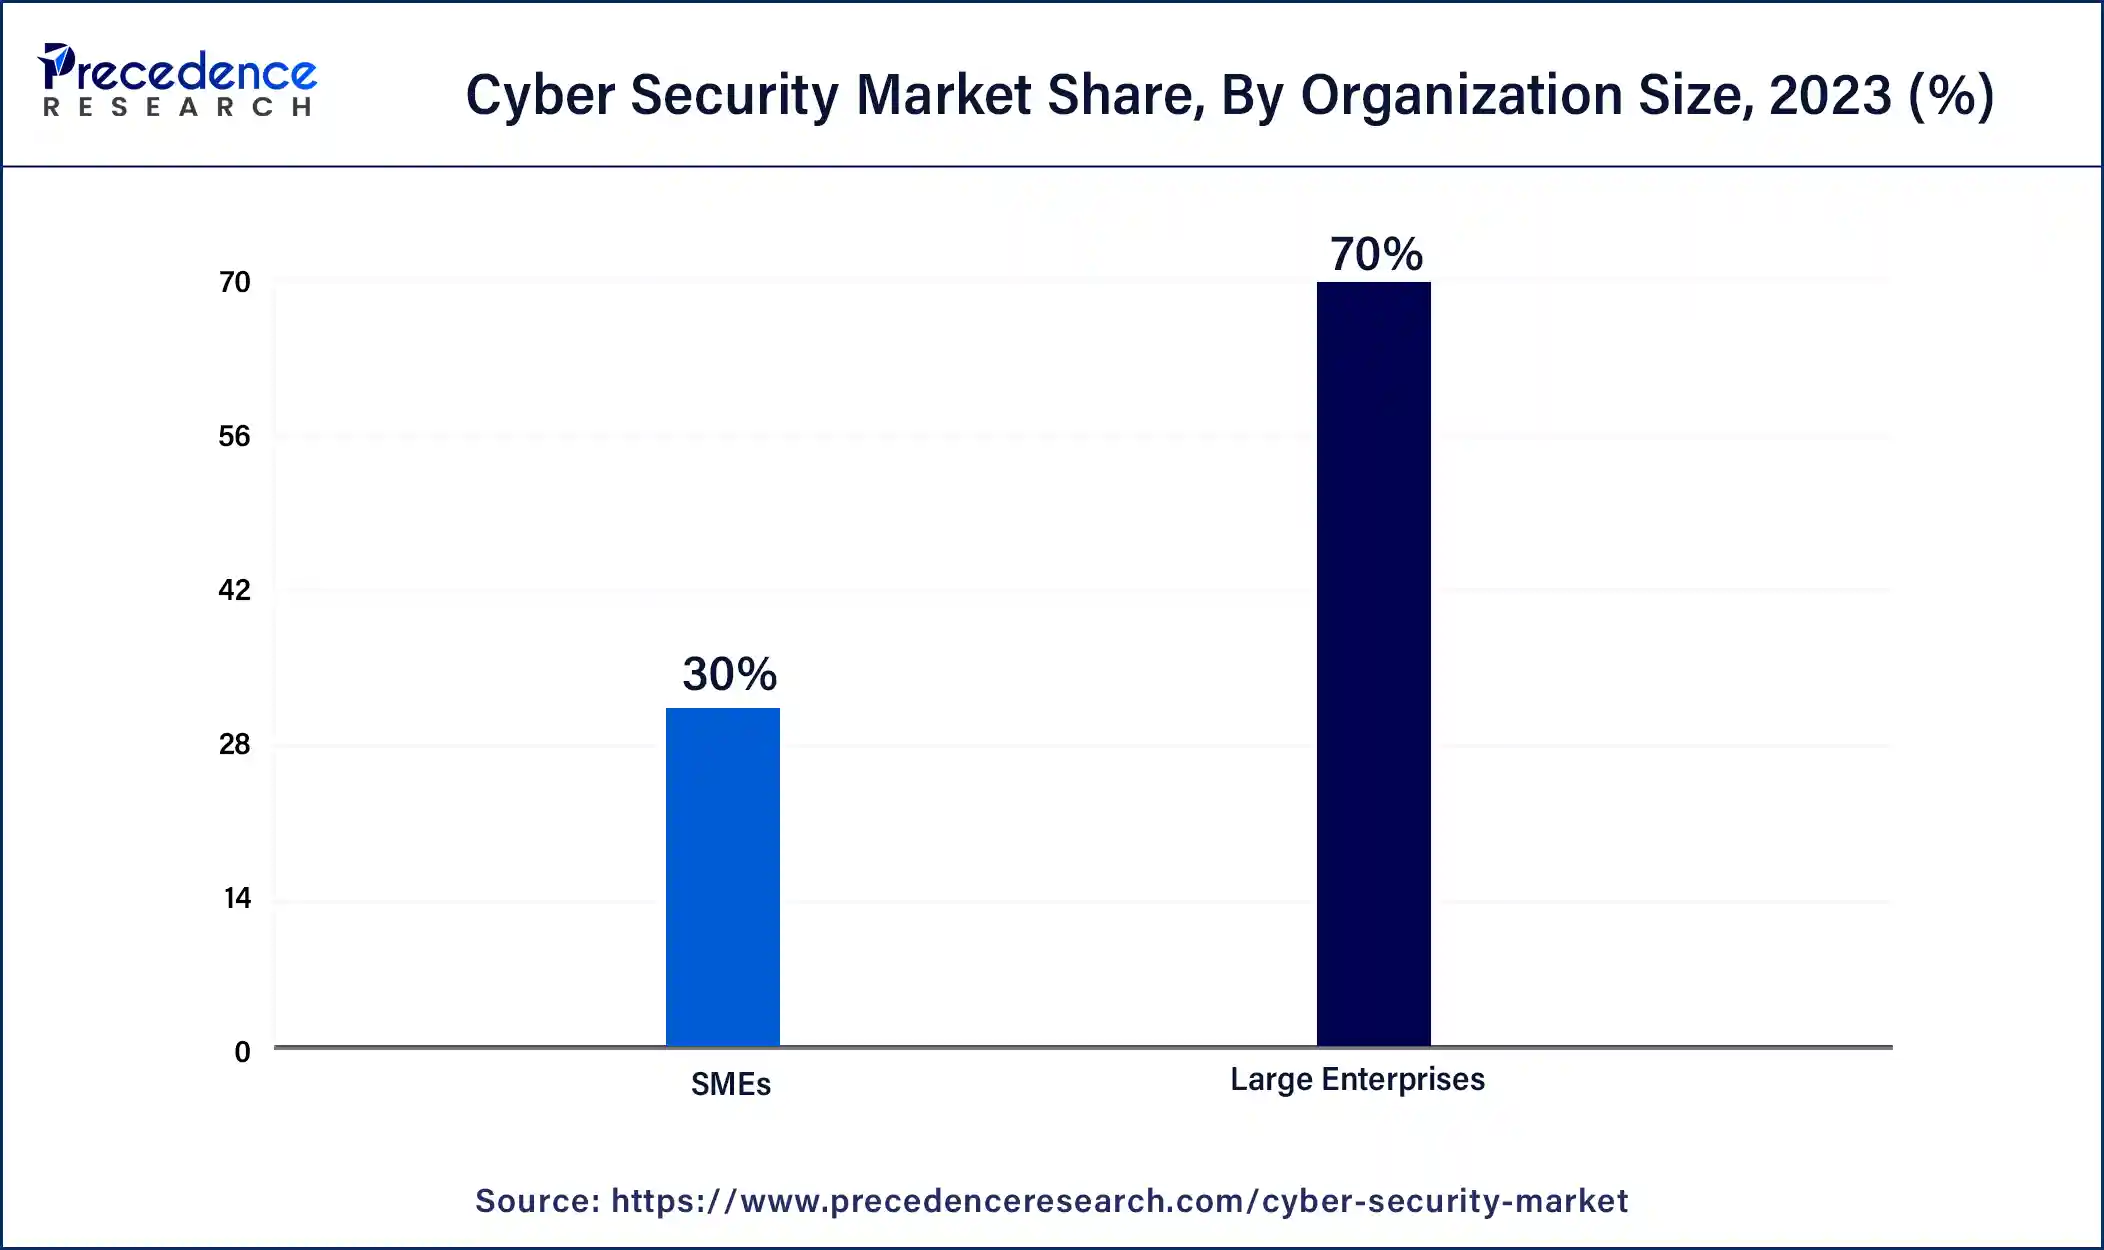 Cyber Security Market Share, By Organization Size, 2023 (%)